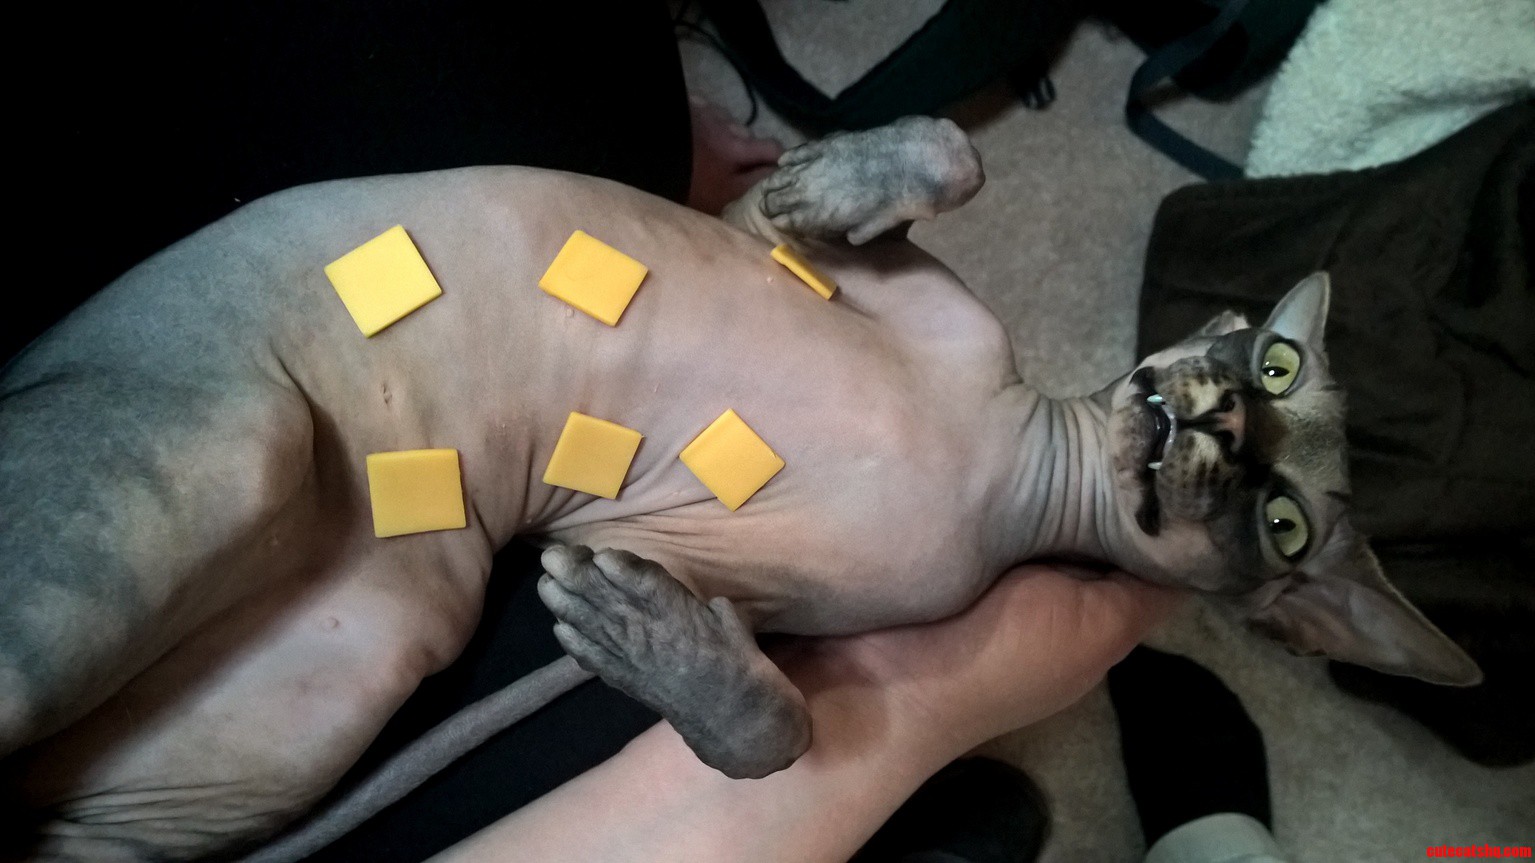 A sphynx with cheese on its nipples